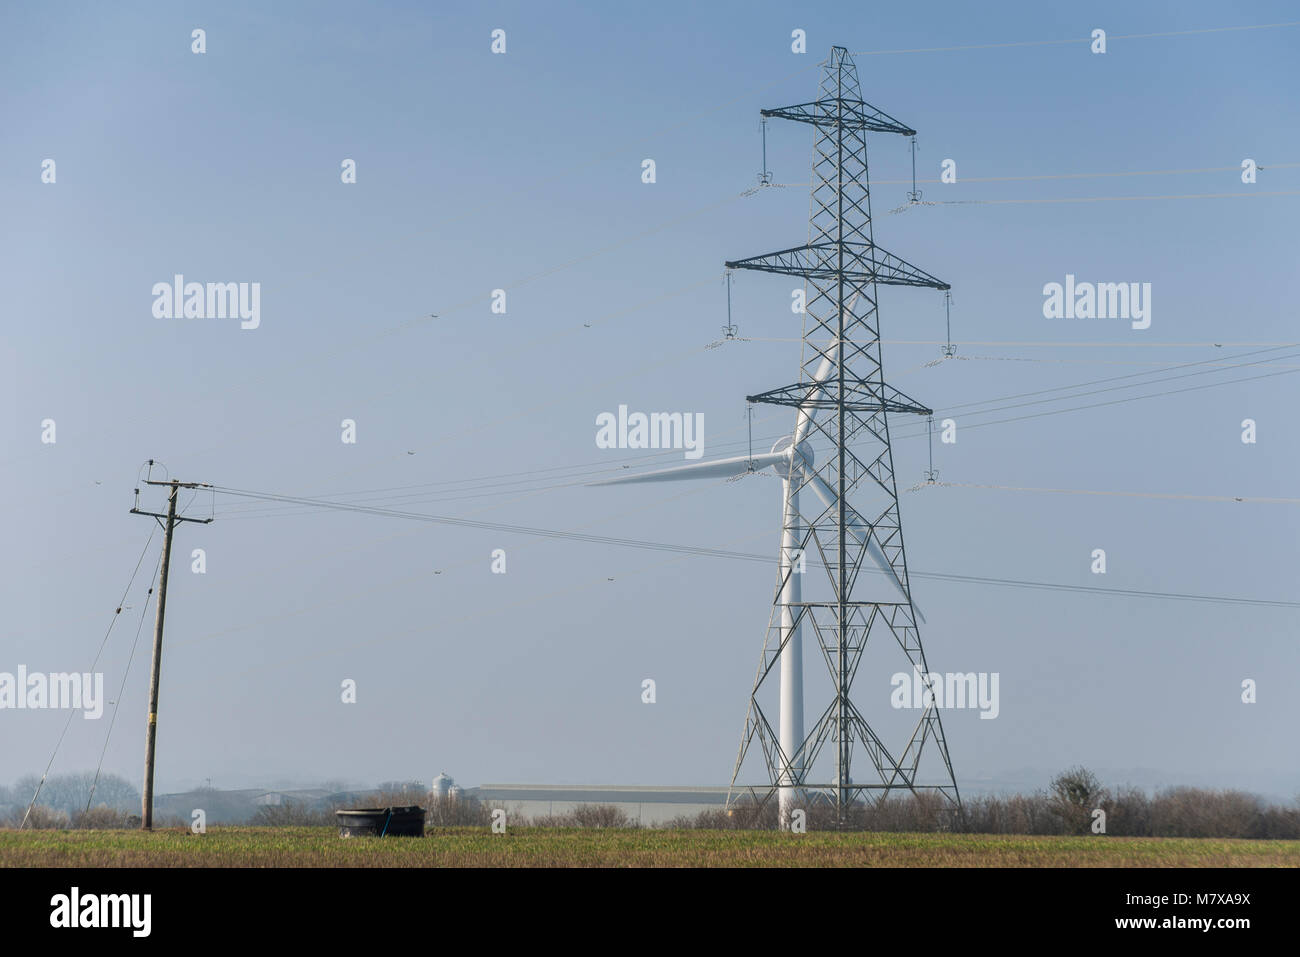 Wind turbine and electricity pylon in a rural area Stock Photo